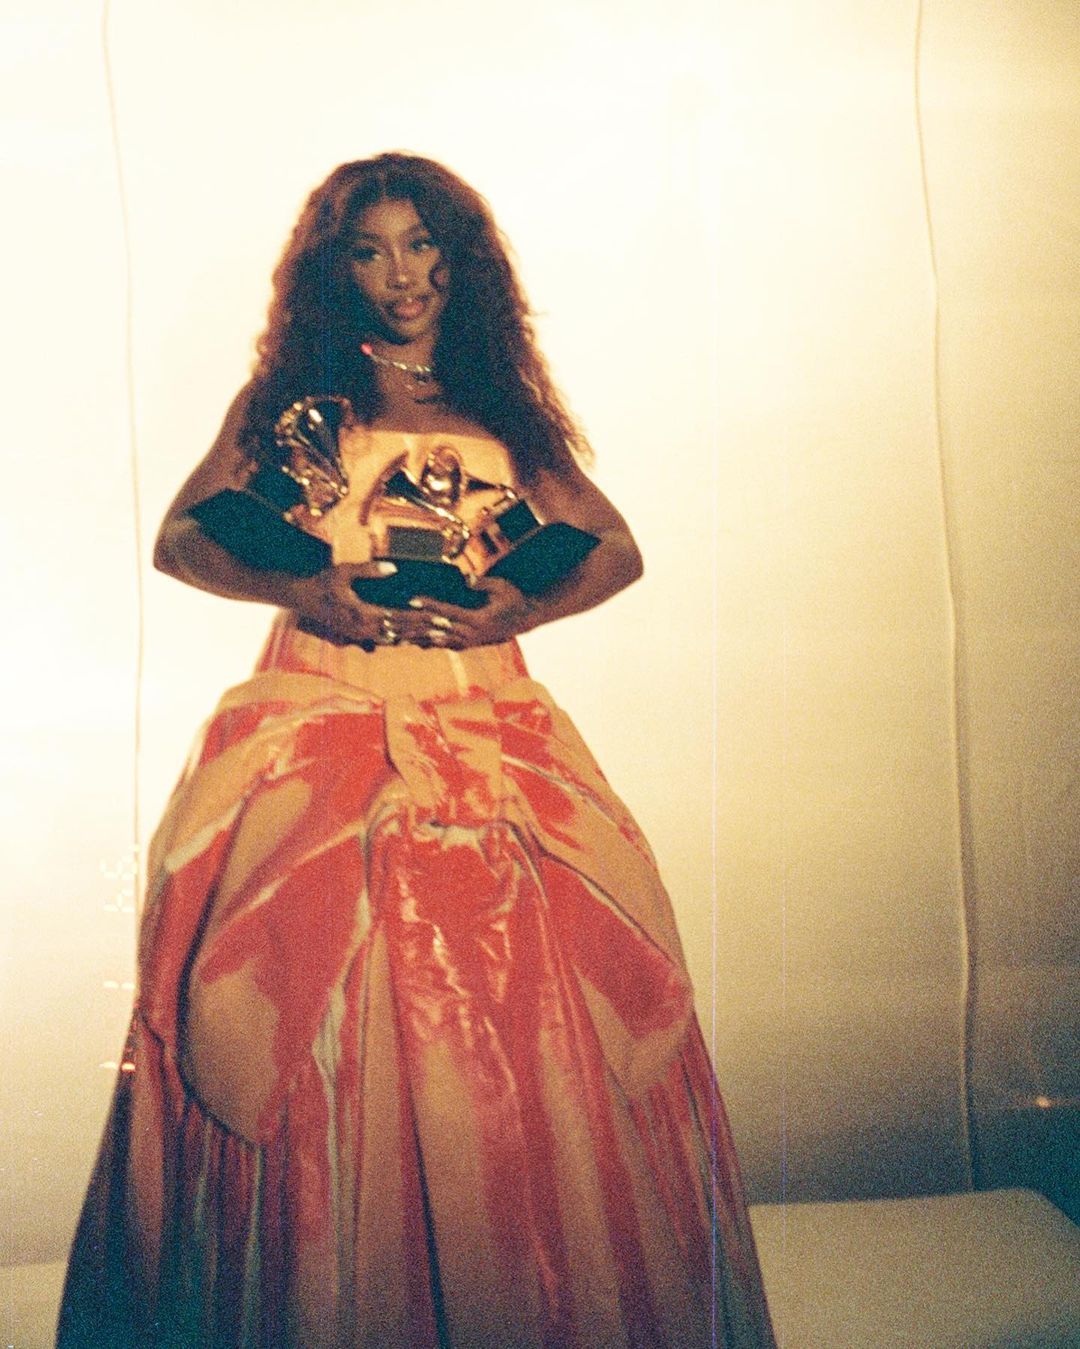 Ice Spice's Baby Phat Grammys Look Was an Ode to Early-'00s NYC